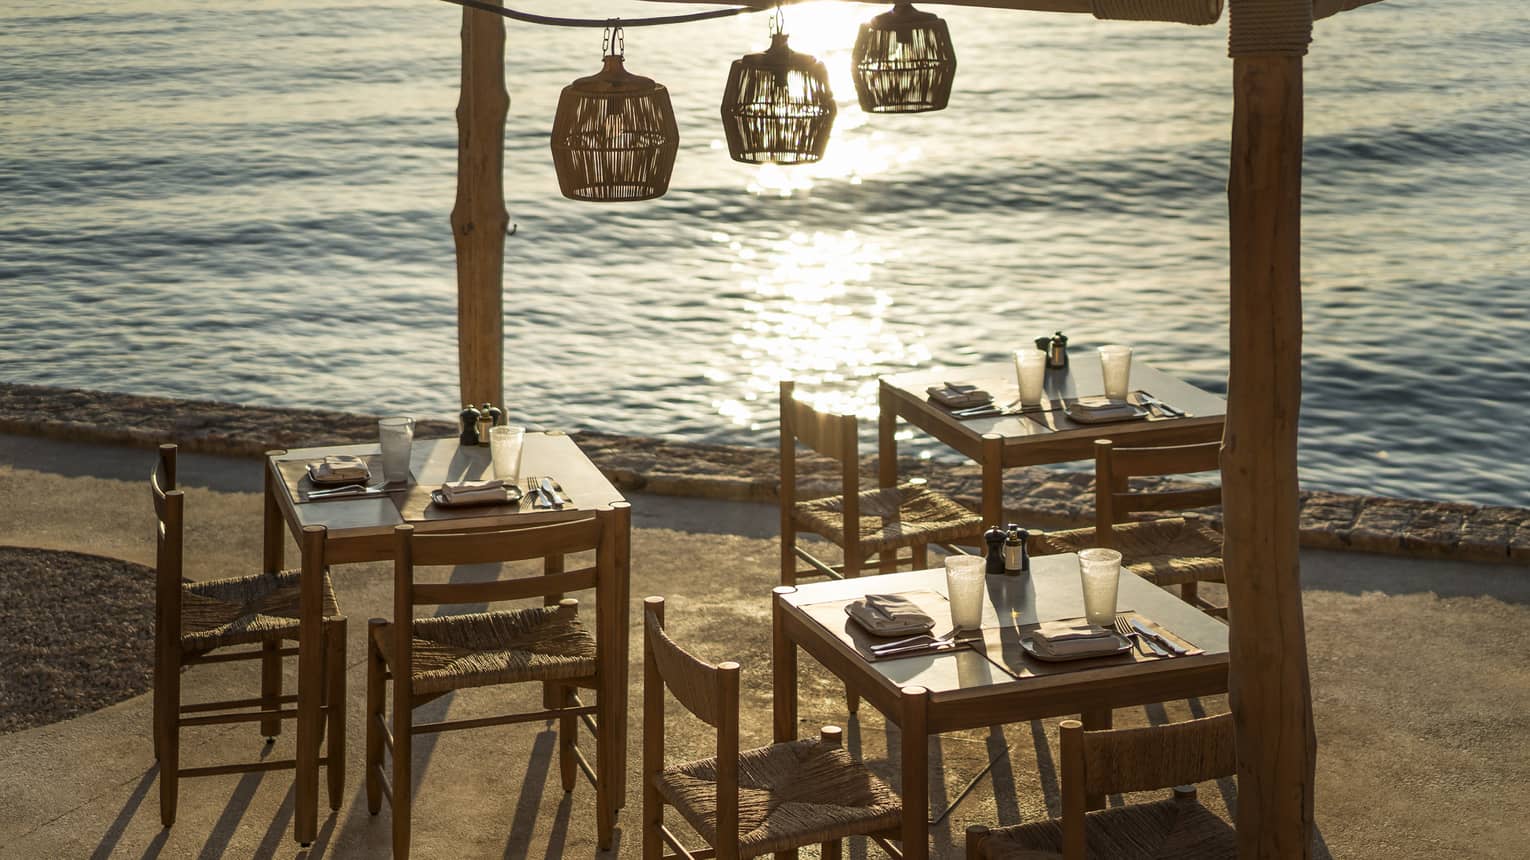 Outdoor taverna next to ocean with three wooden tables and chairs, three wooden lamps